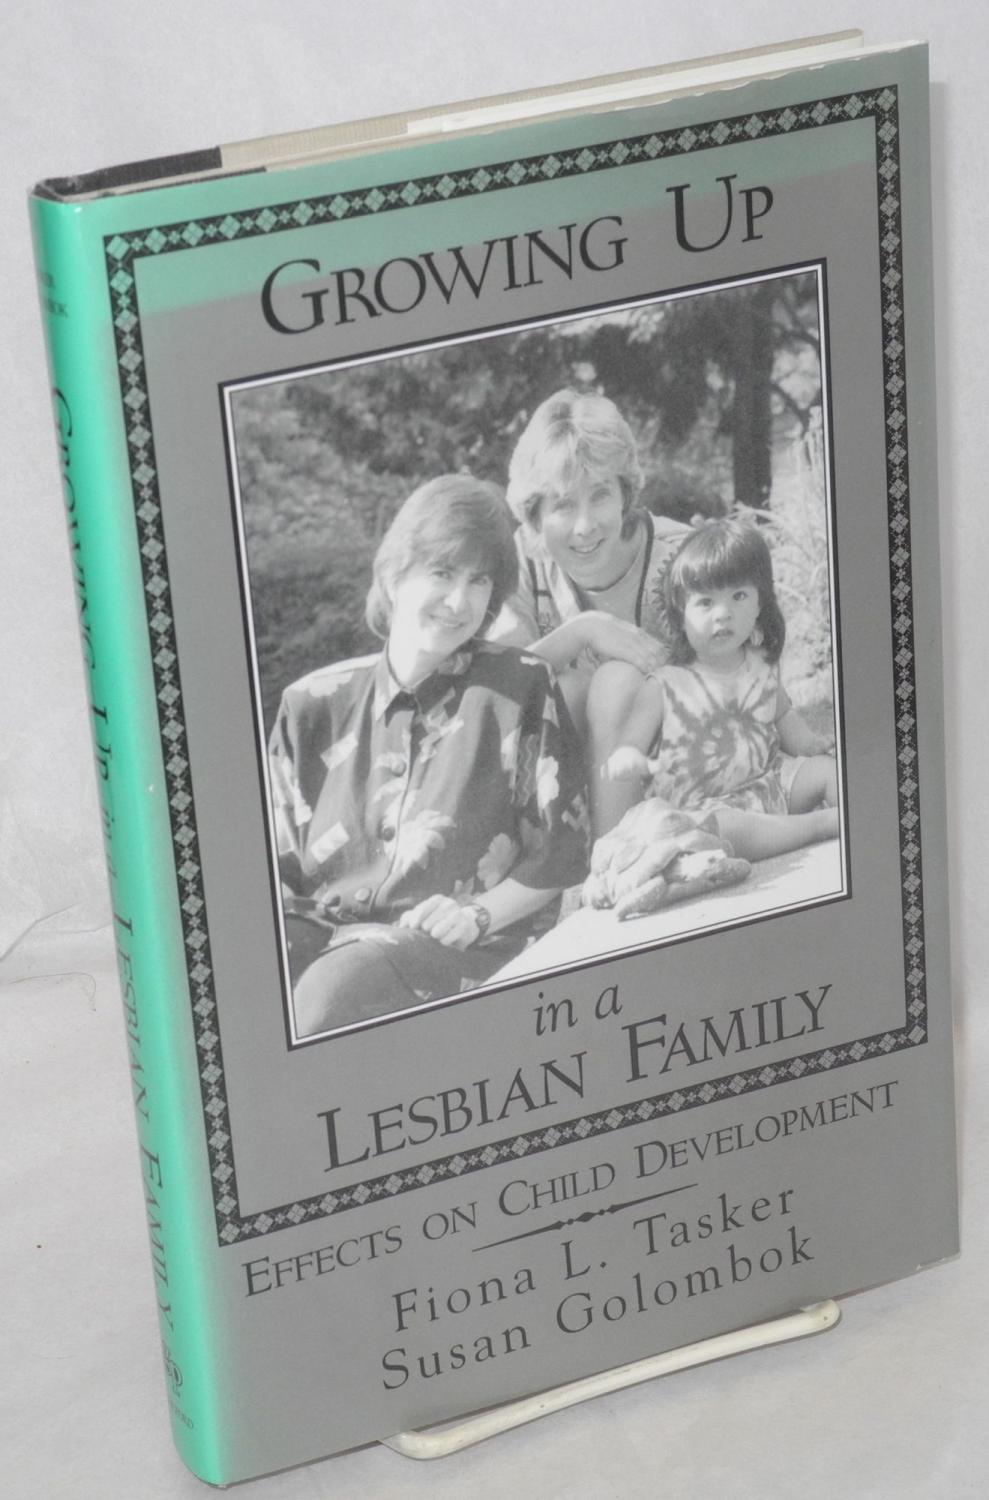 Growing up in a lesbian family; effects on child development Tasker, Fiona L. and Susan Golombok: Hardcover (1997) | Bolerium Books Inc.